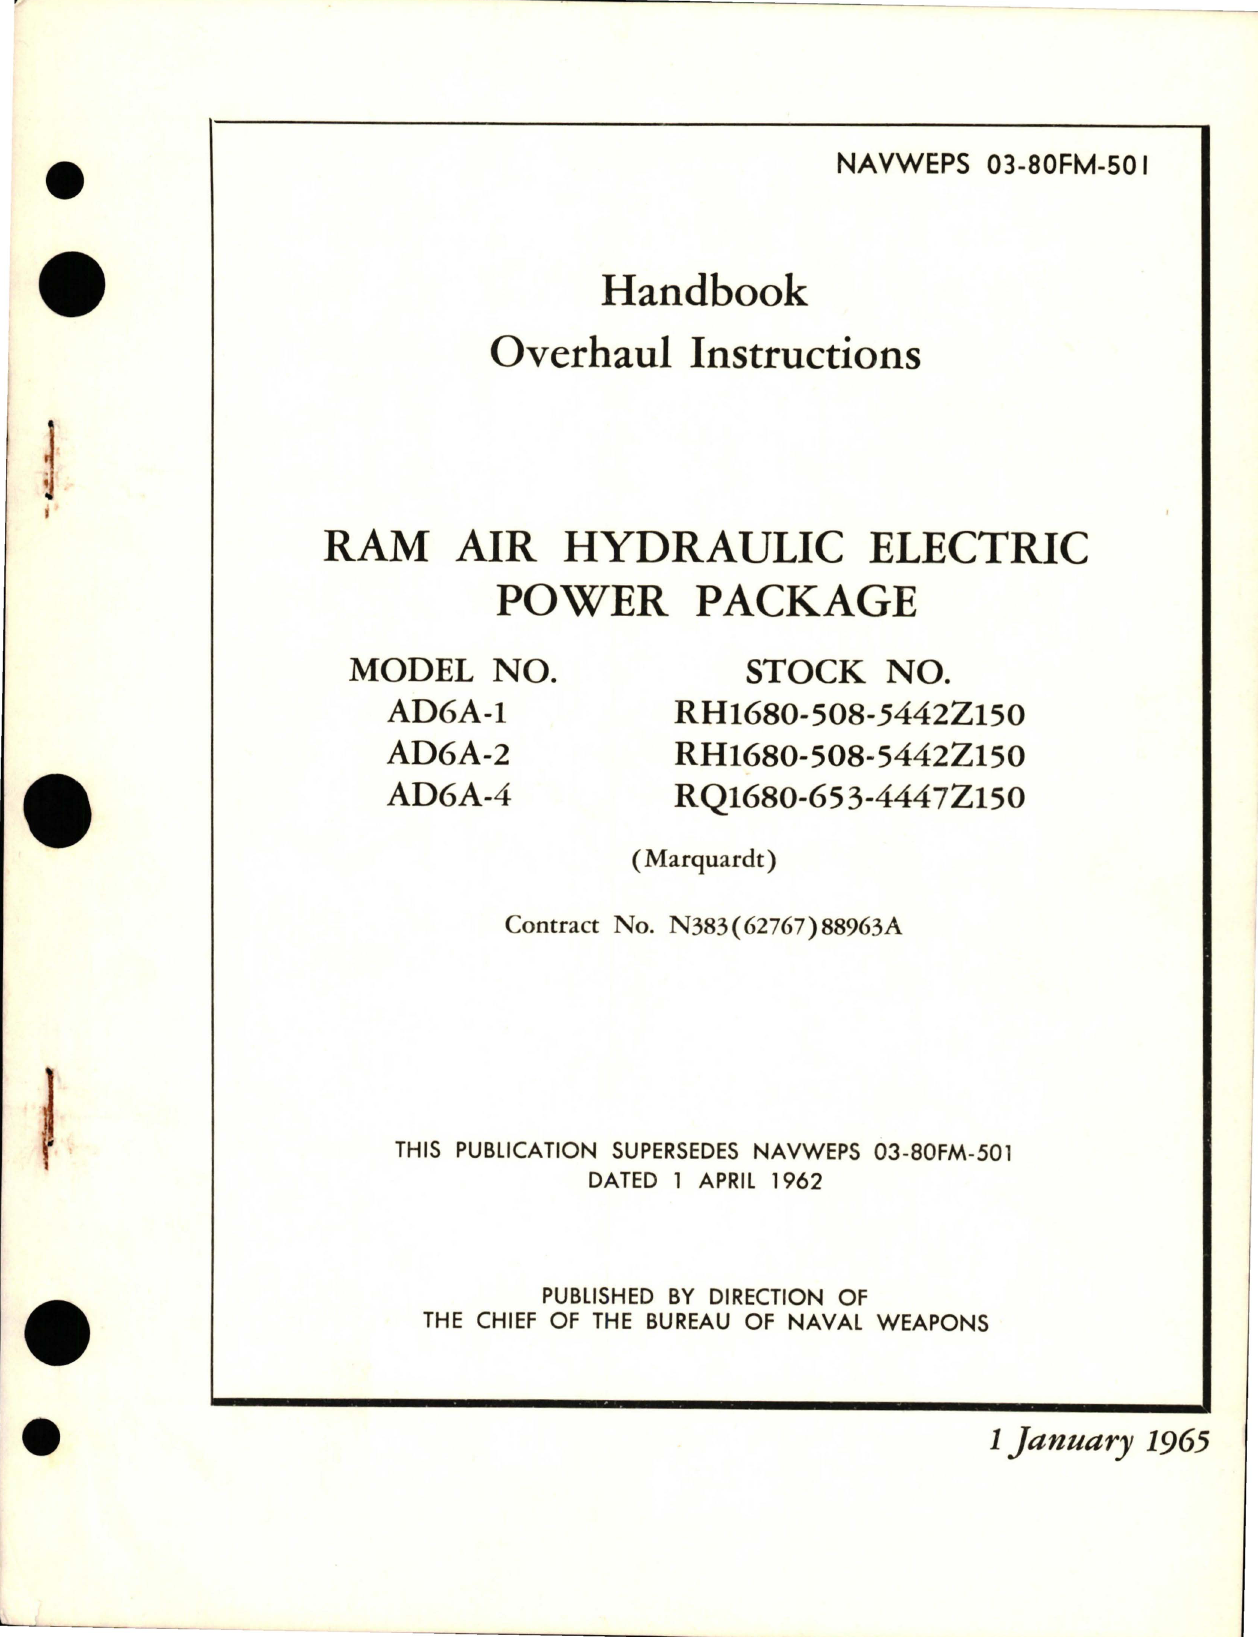 Sample page 1 from AirCorps Library document: Overhaul Instructions for Ram Air Hydraulic Electric Power Package - Models AD6A-1, AD6A-2, and AD6A-4